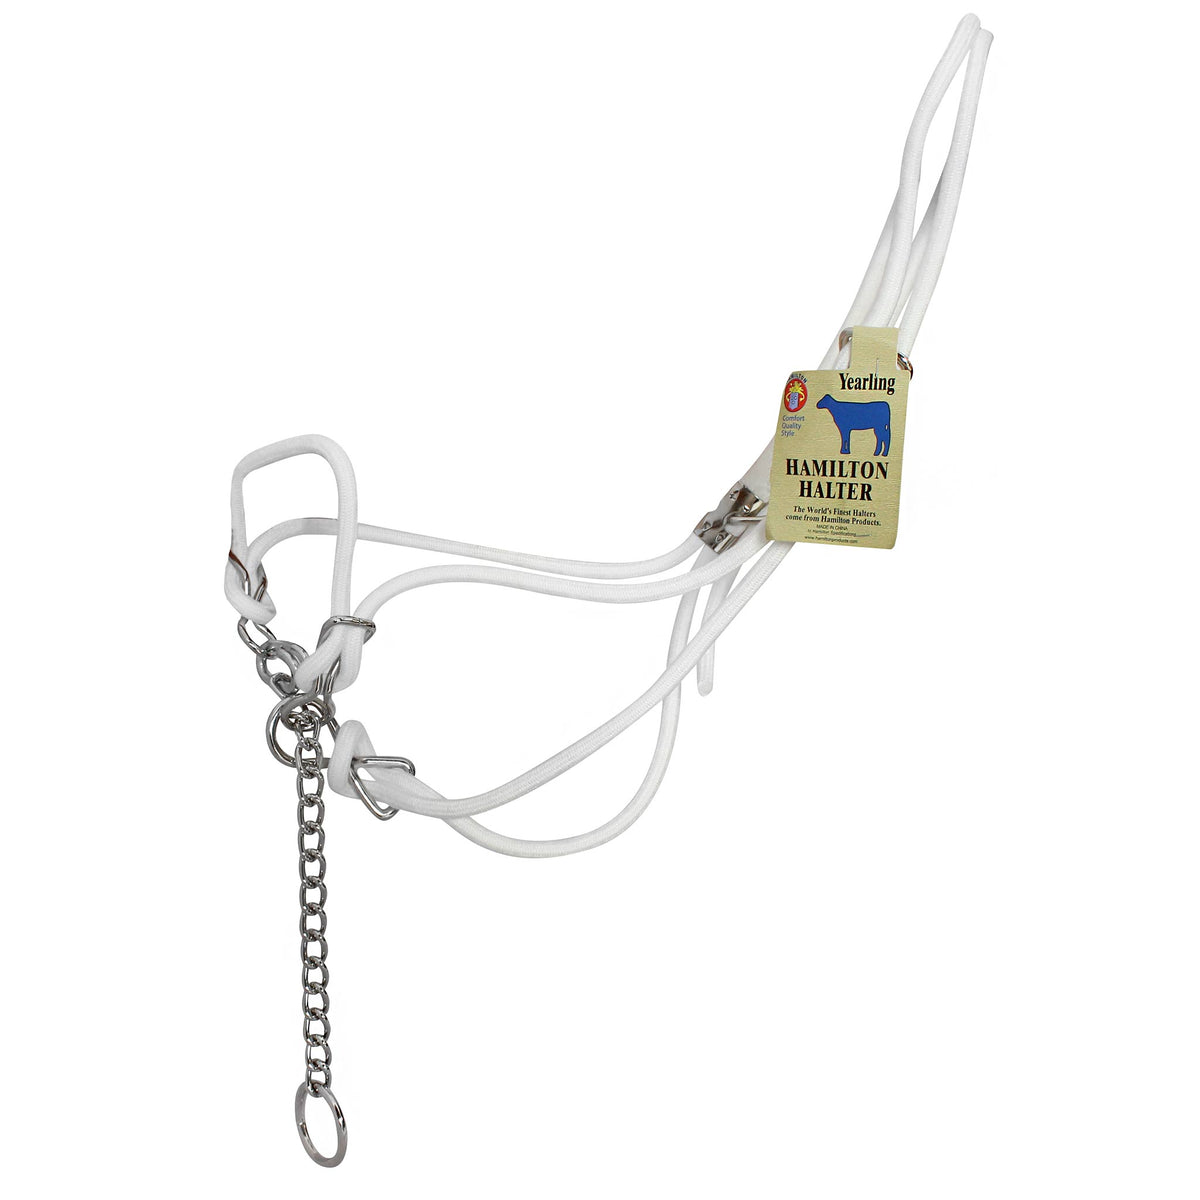 Hamilton Cattle Halter - White Cotton Rope with Control Chain